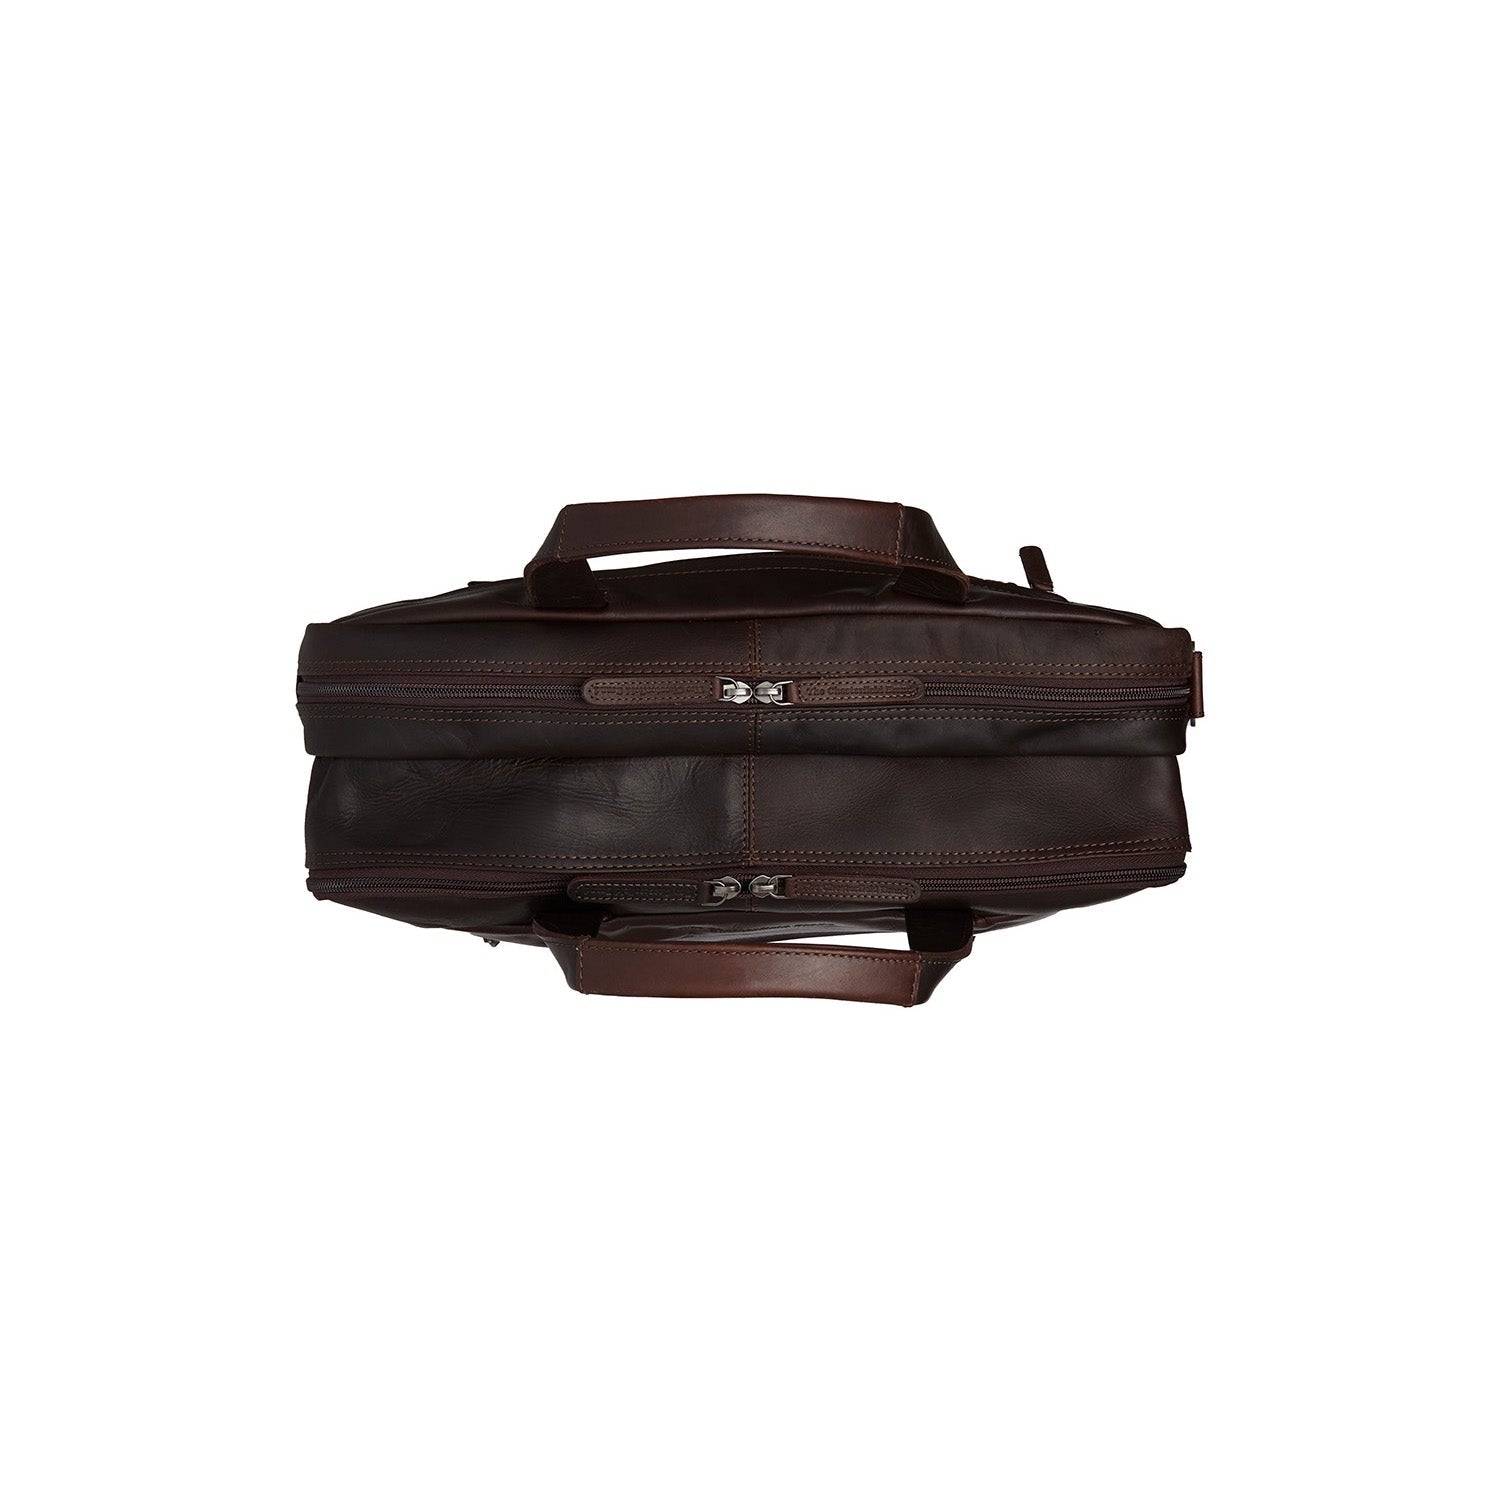 Leather Laptop Bag - The Chesterfield Brand Ryan Brown